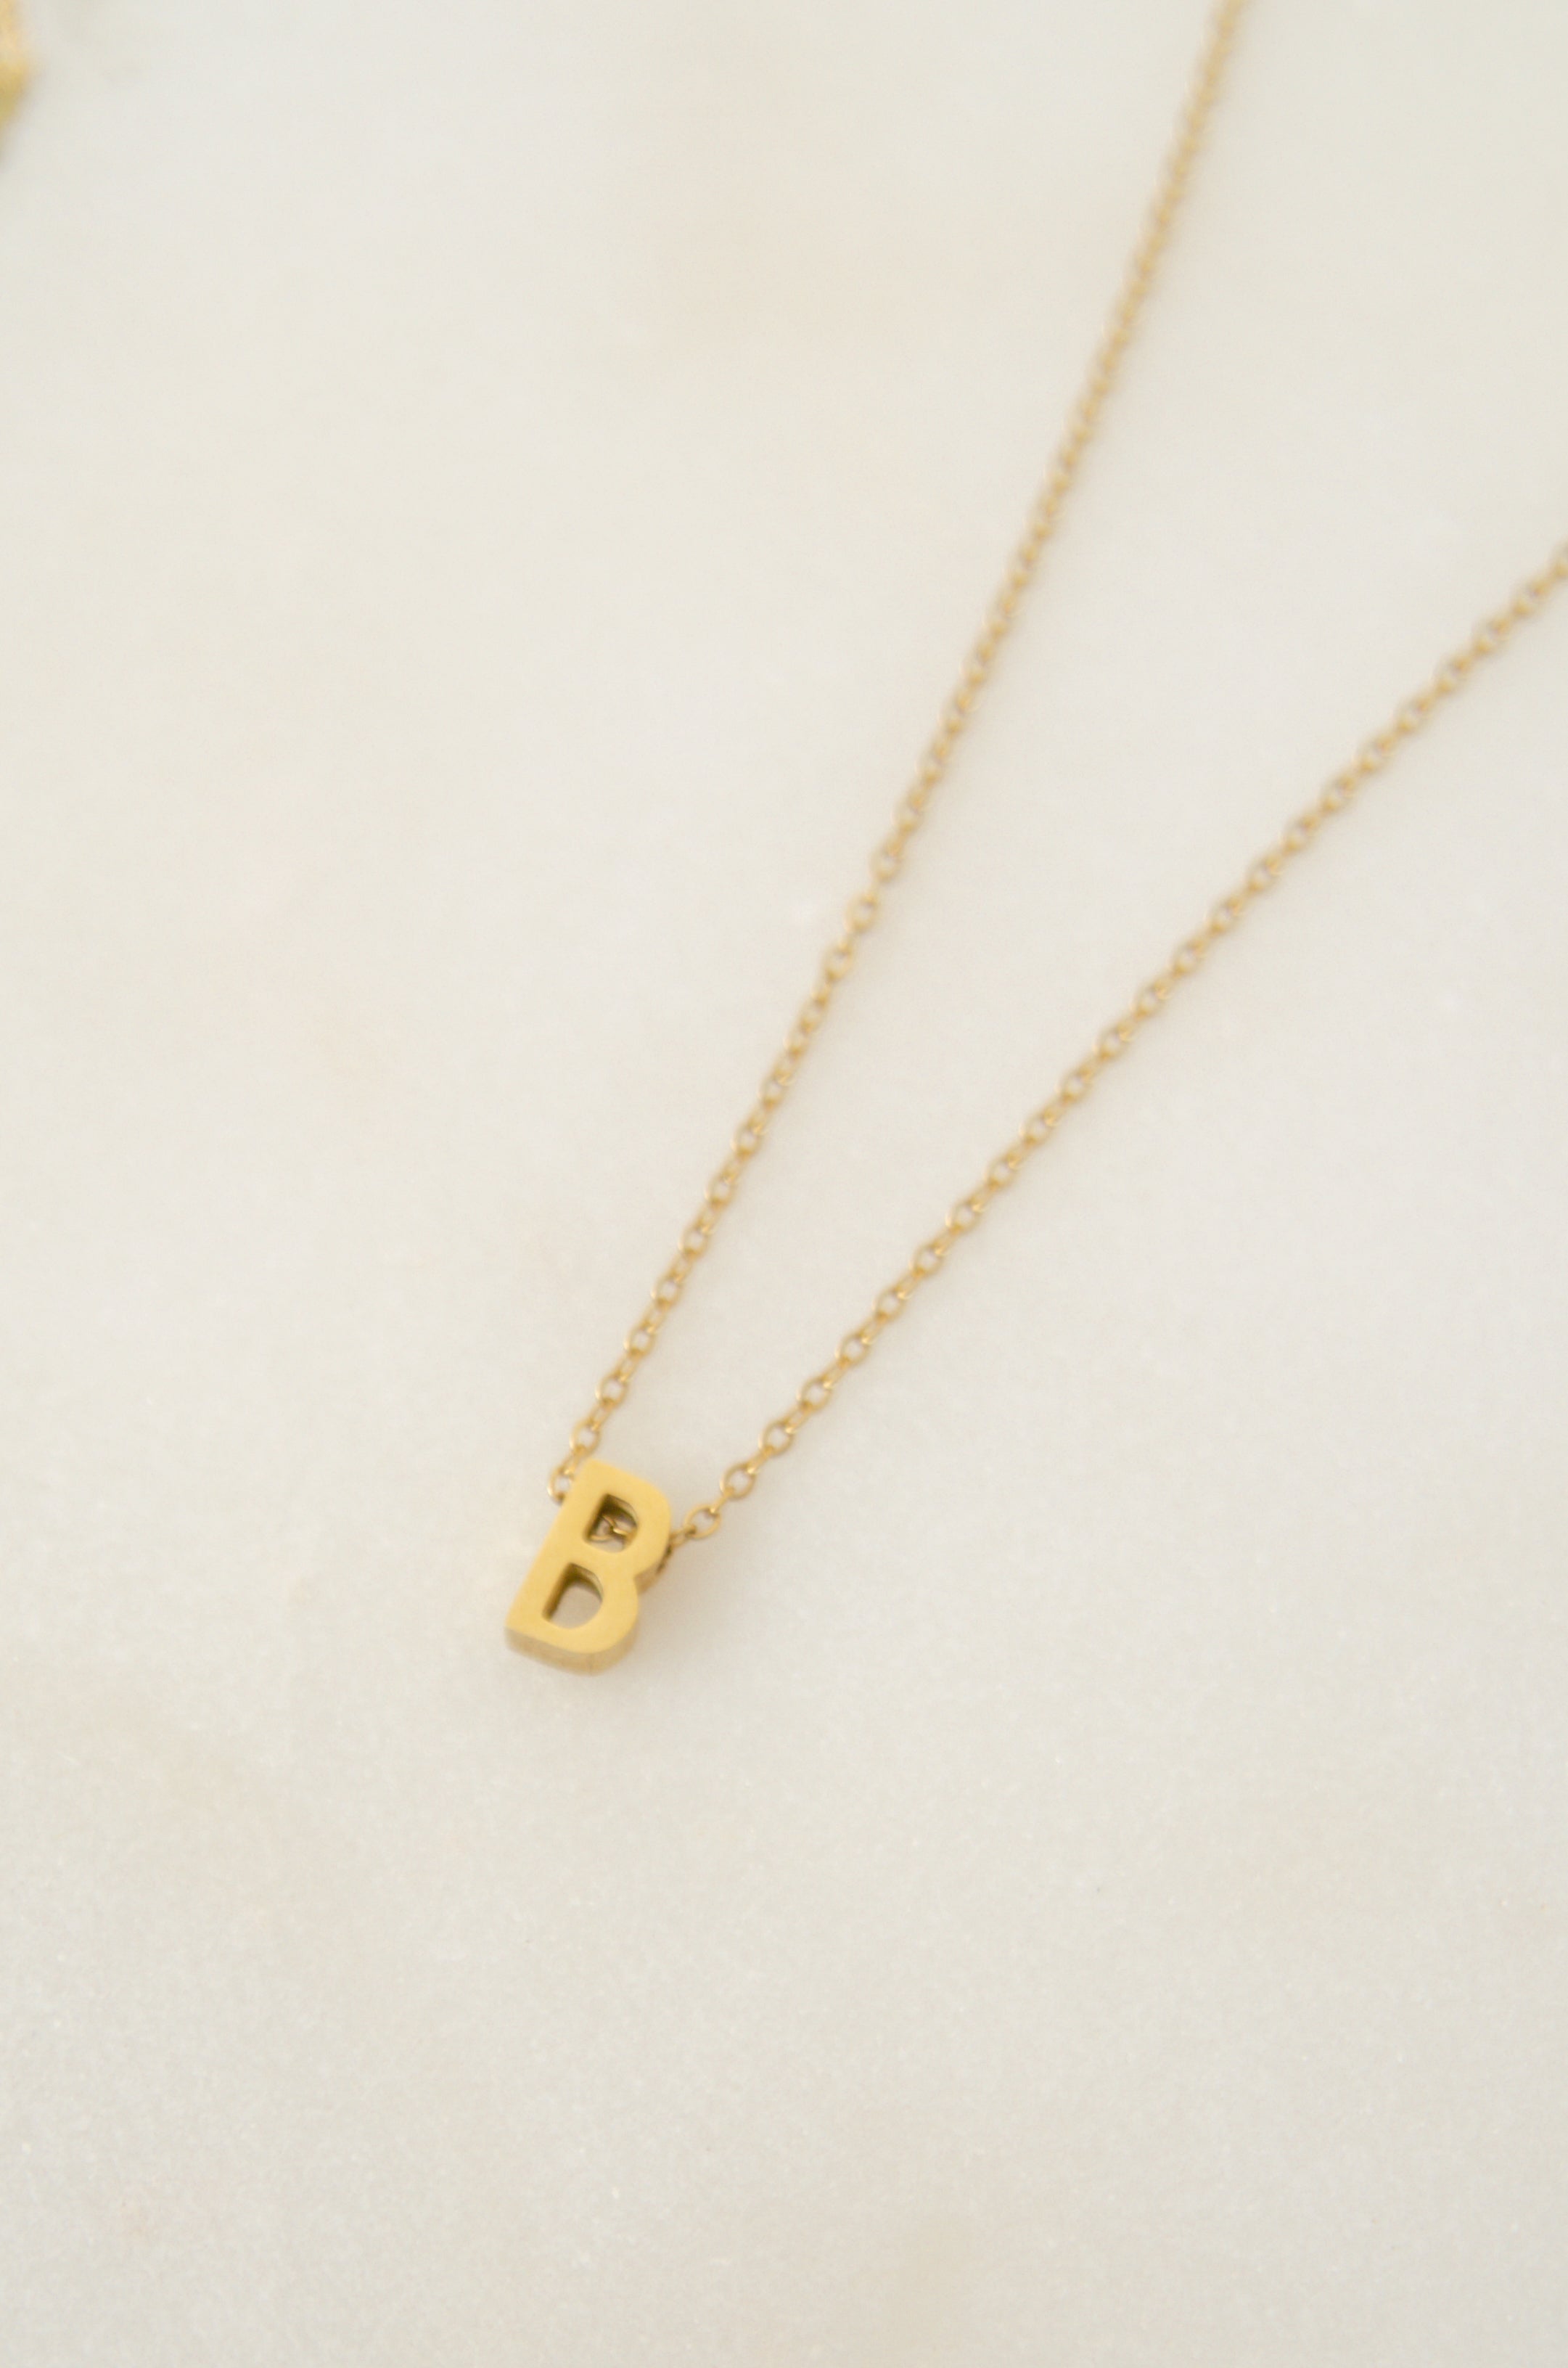 LETTERS NECKLACE // B